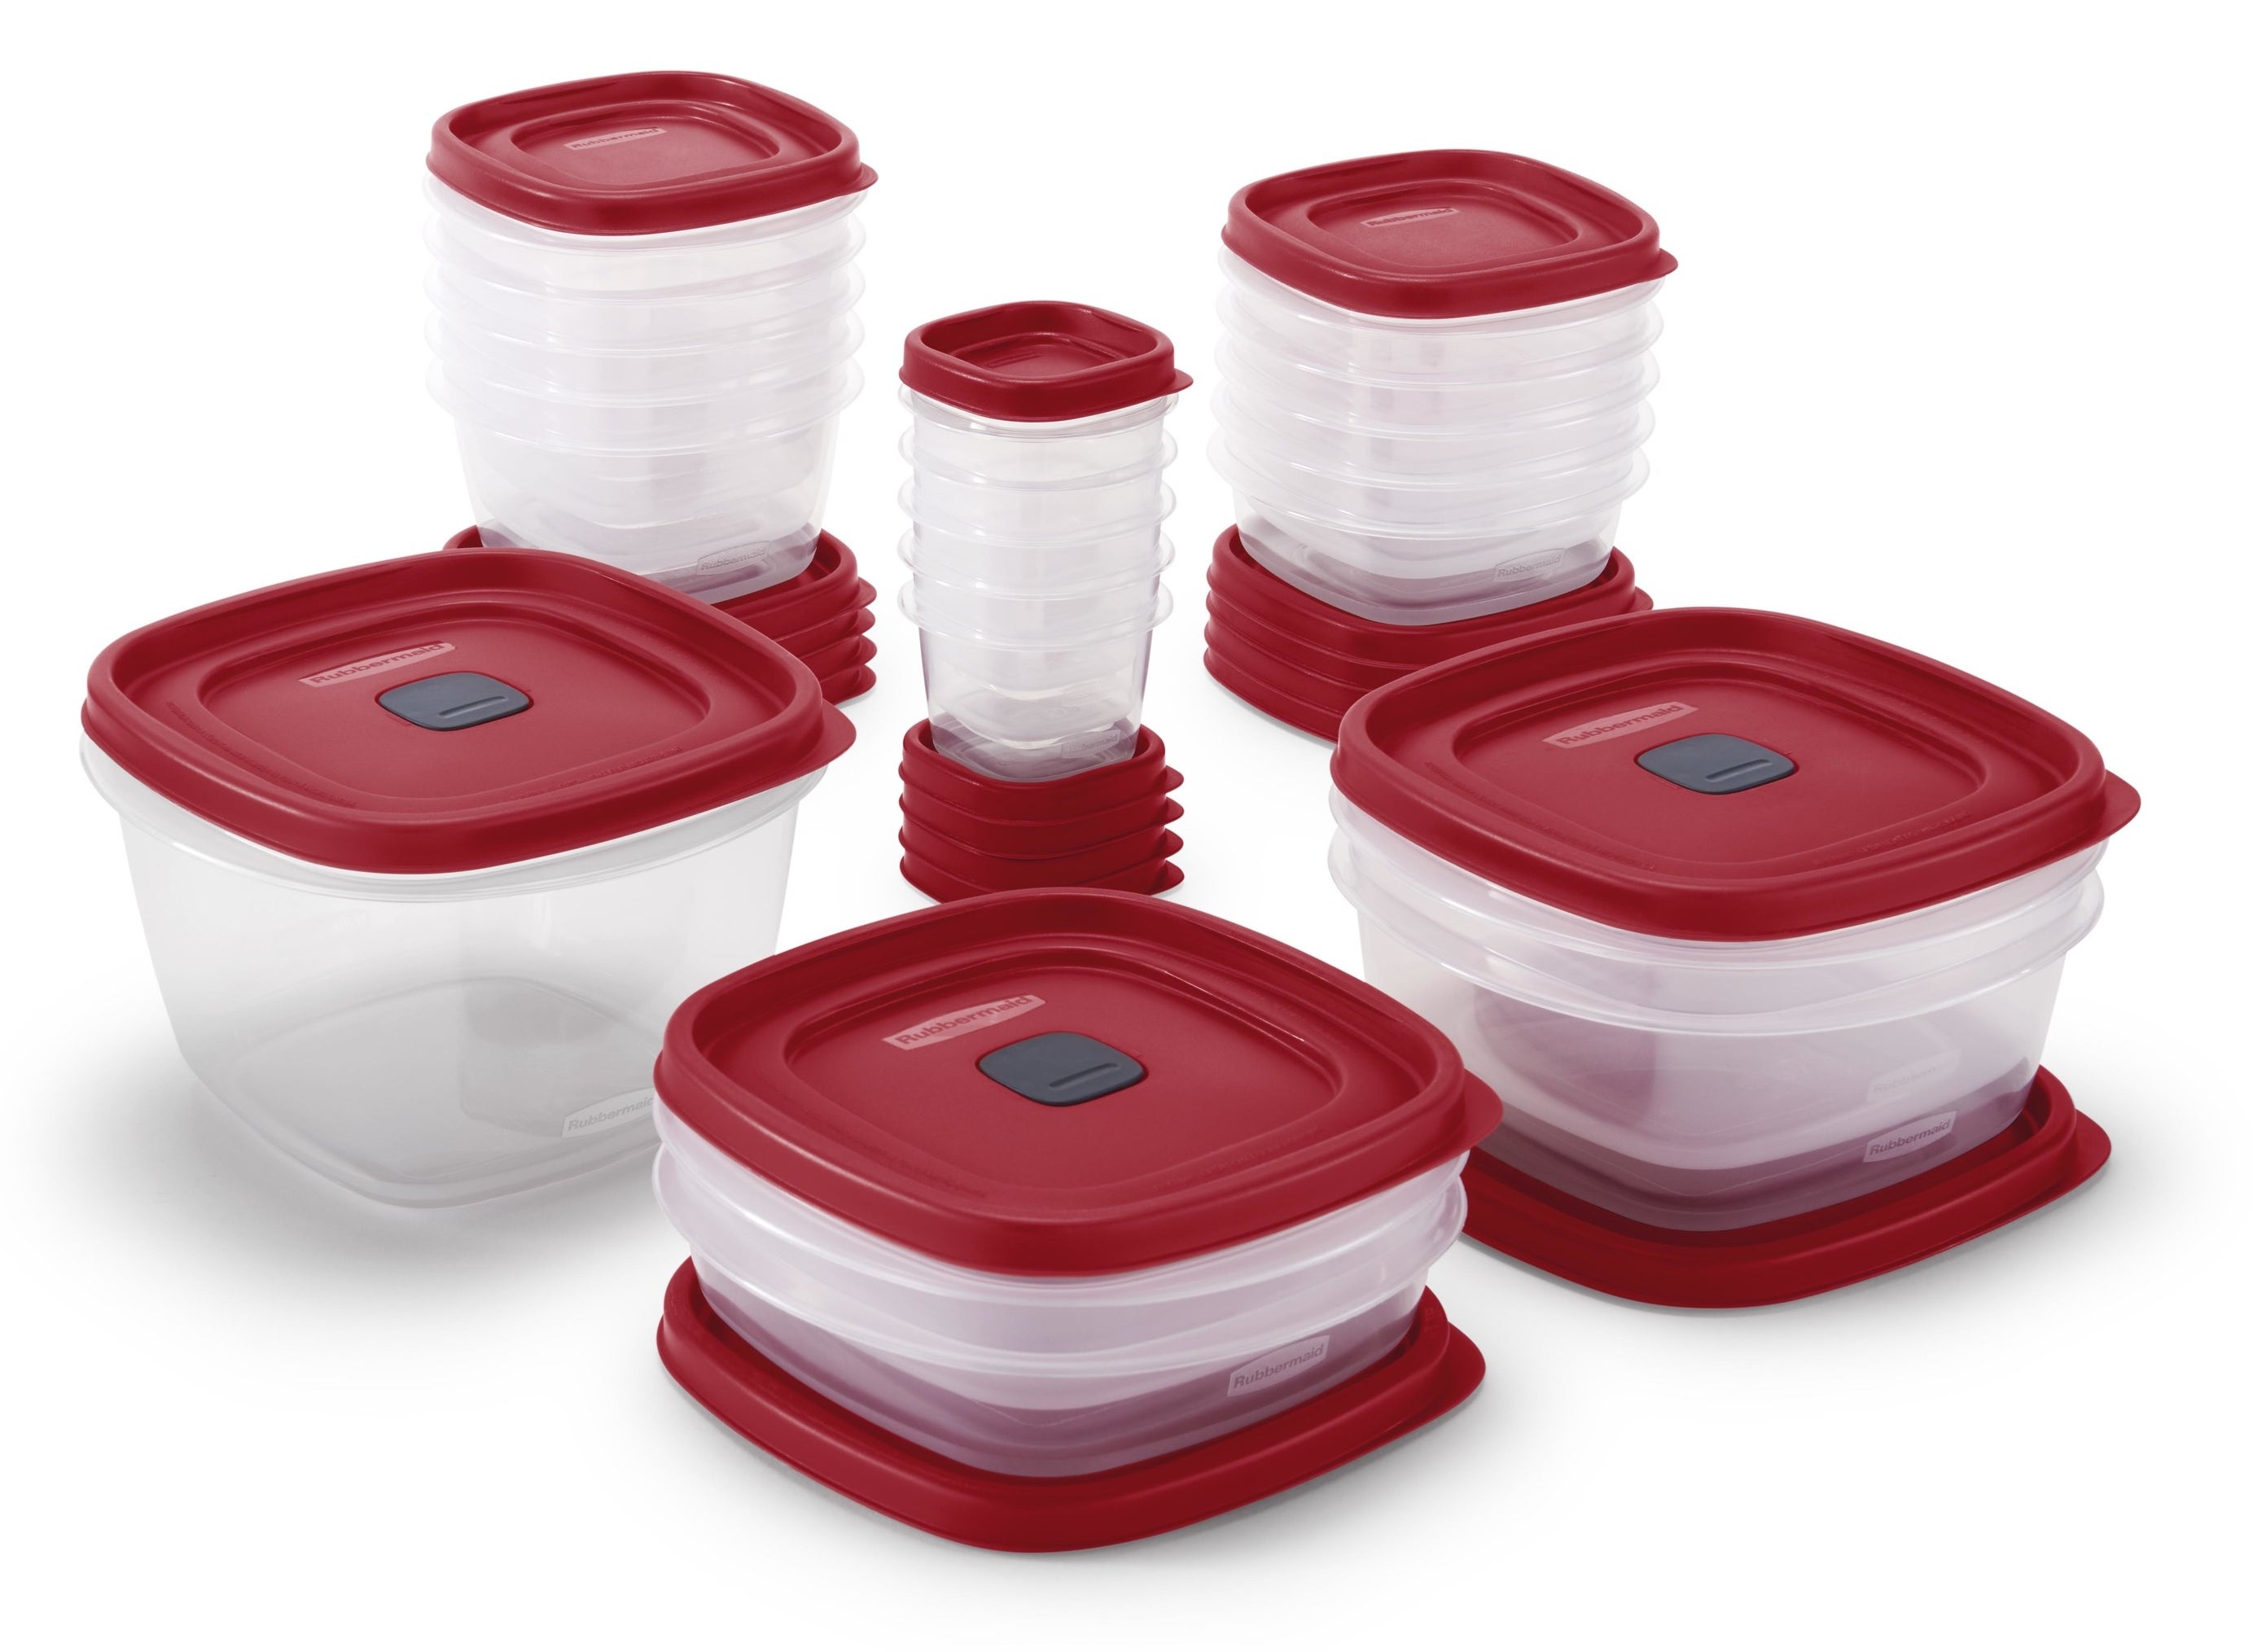 The red lidded storage containers